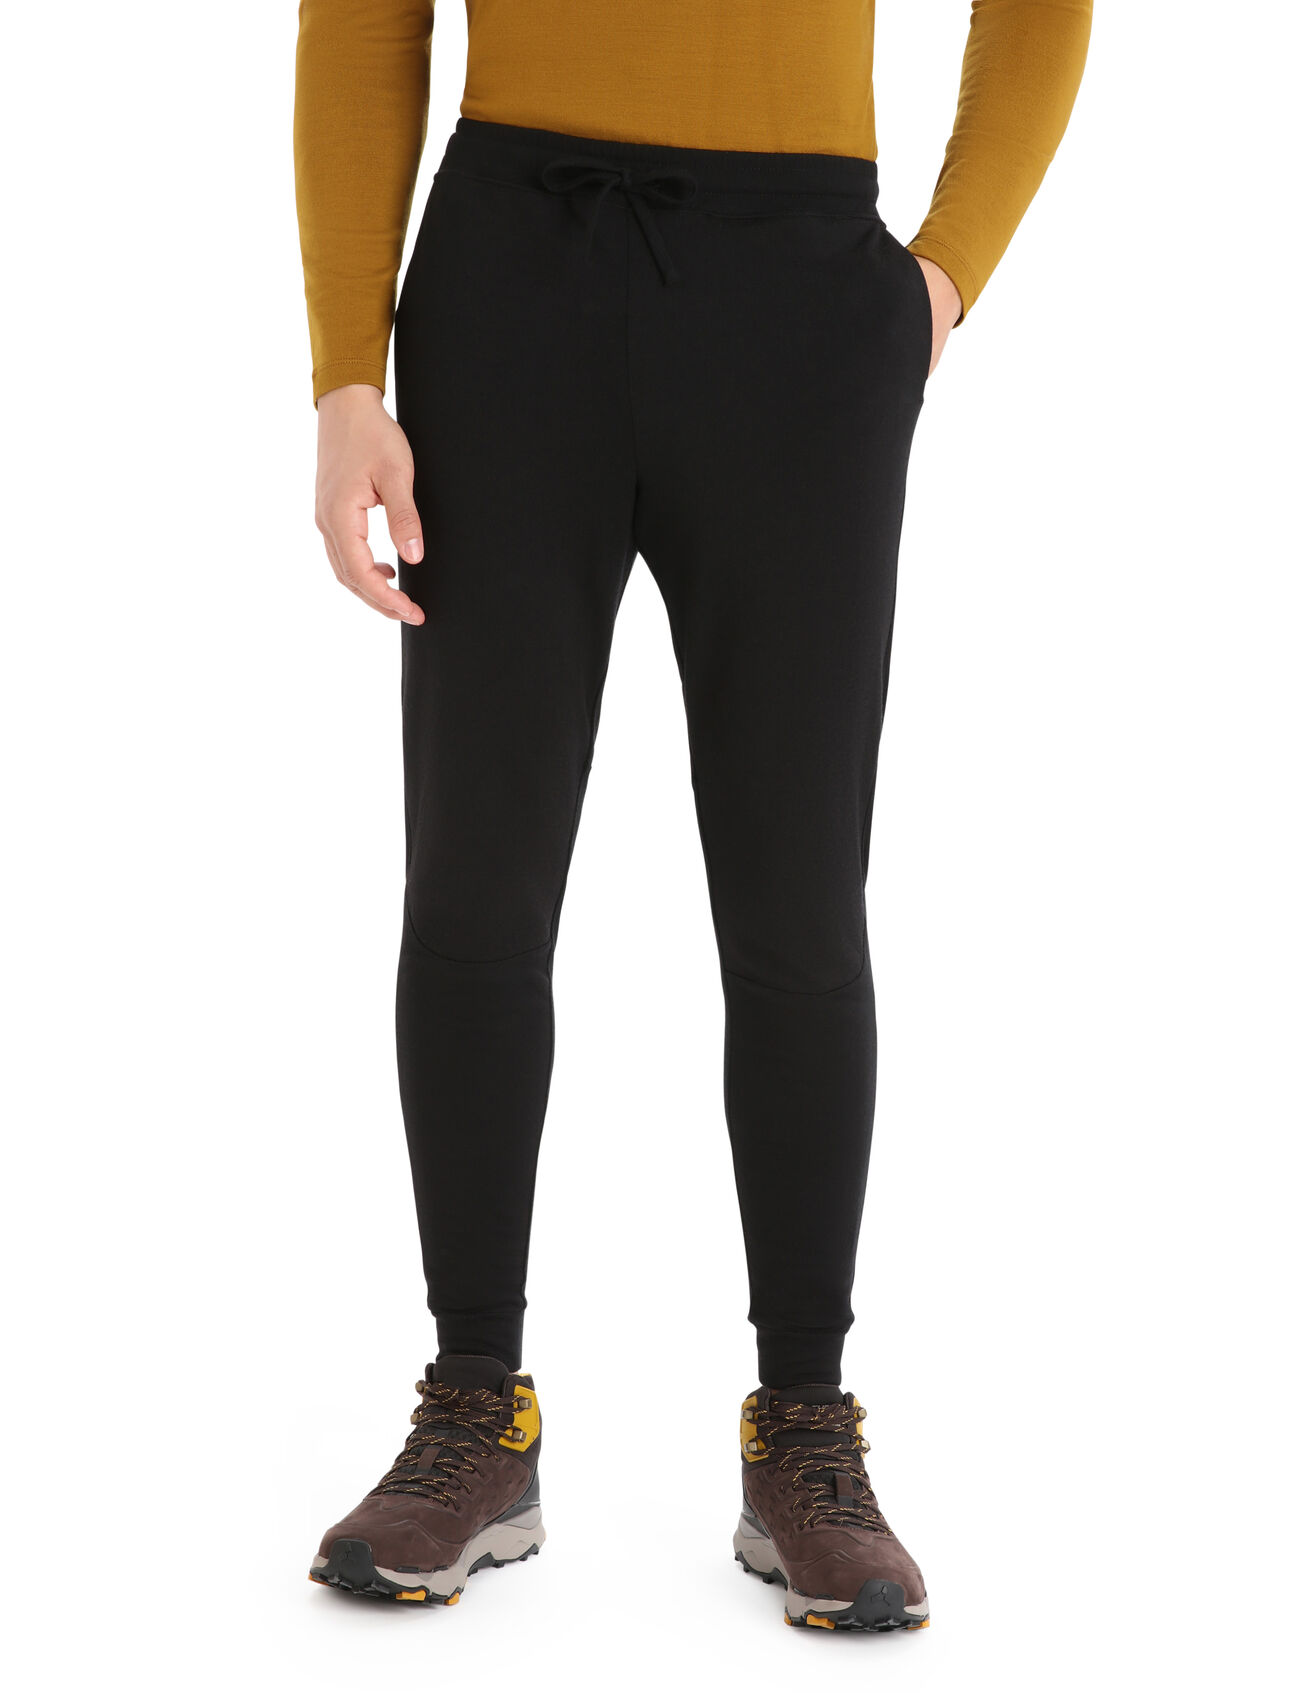 Mens ZoneKnit™ Merino Jogger A highly breathable jogger pant designed for cold, aerobic days outside, the ZoneKnit™ Jogger combines a merino terry fabric with body-mapped panels of merino eyelet mesh for enhanced temperature regulation.